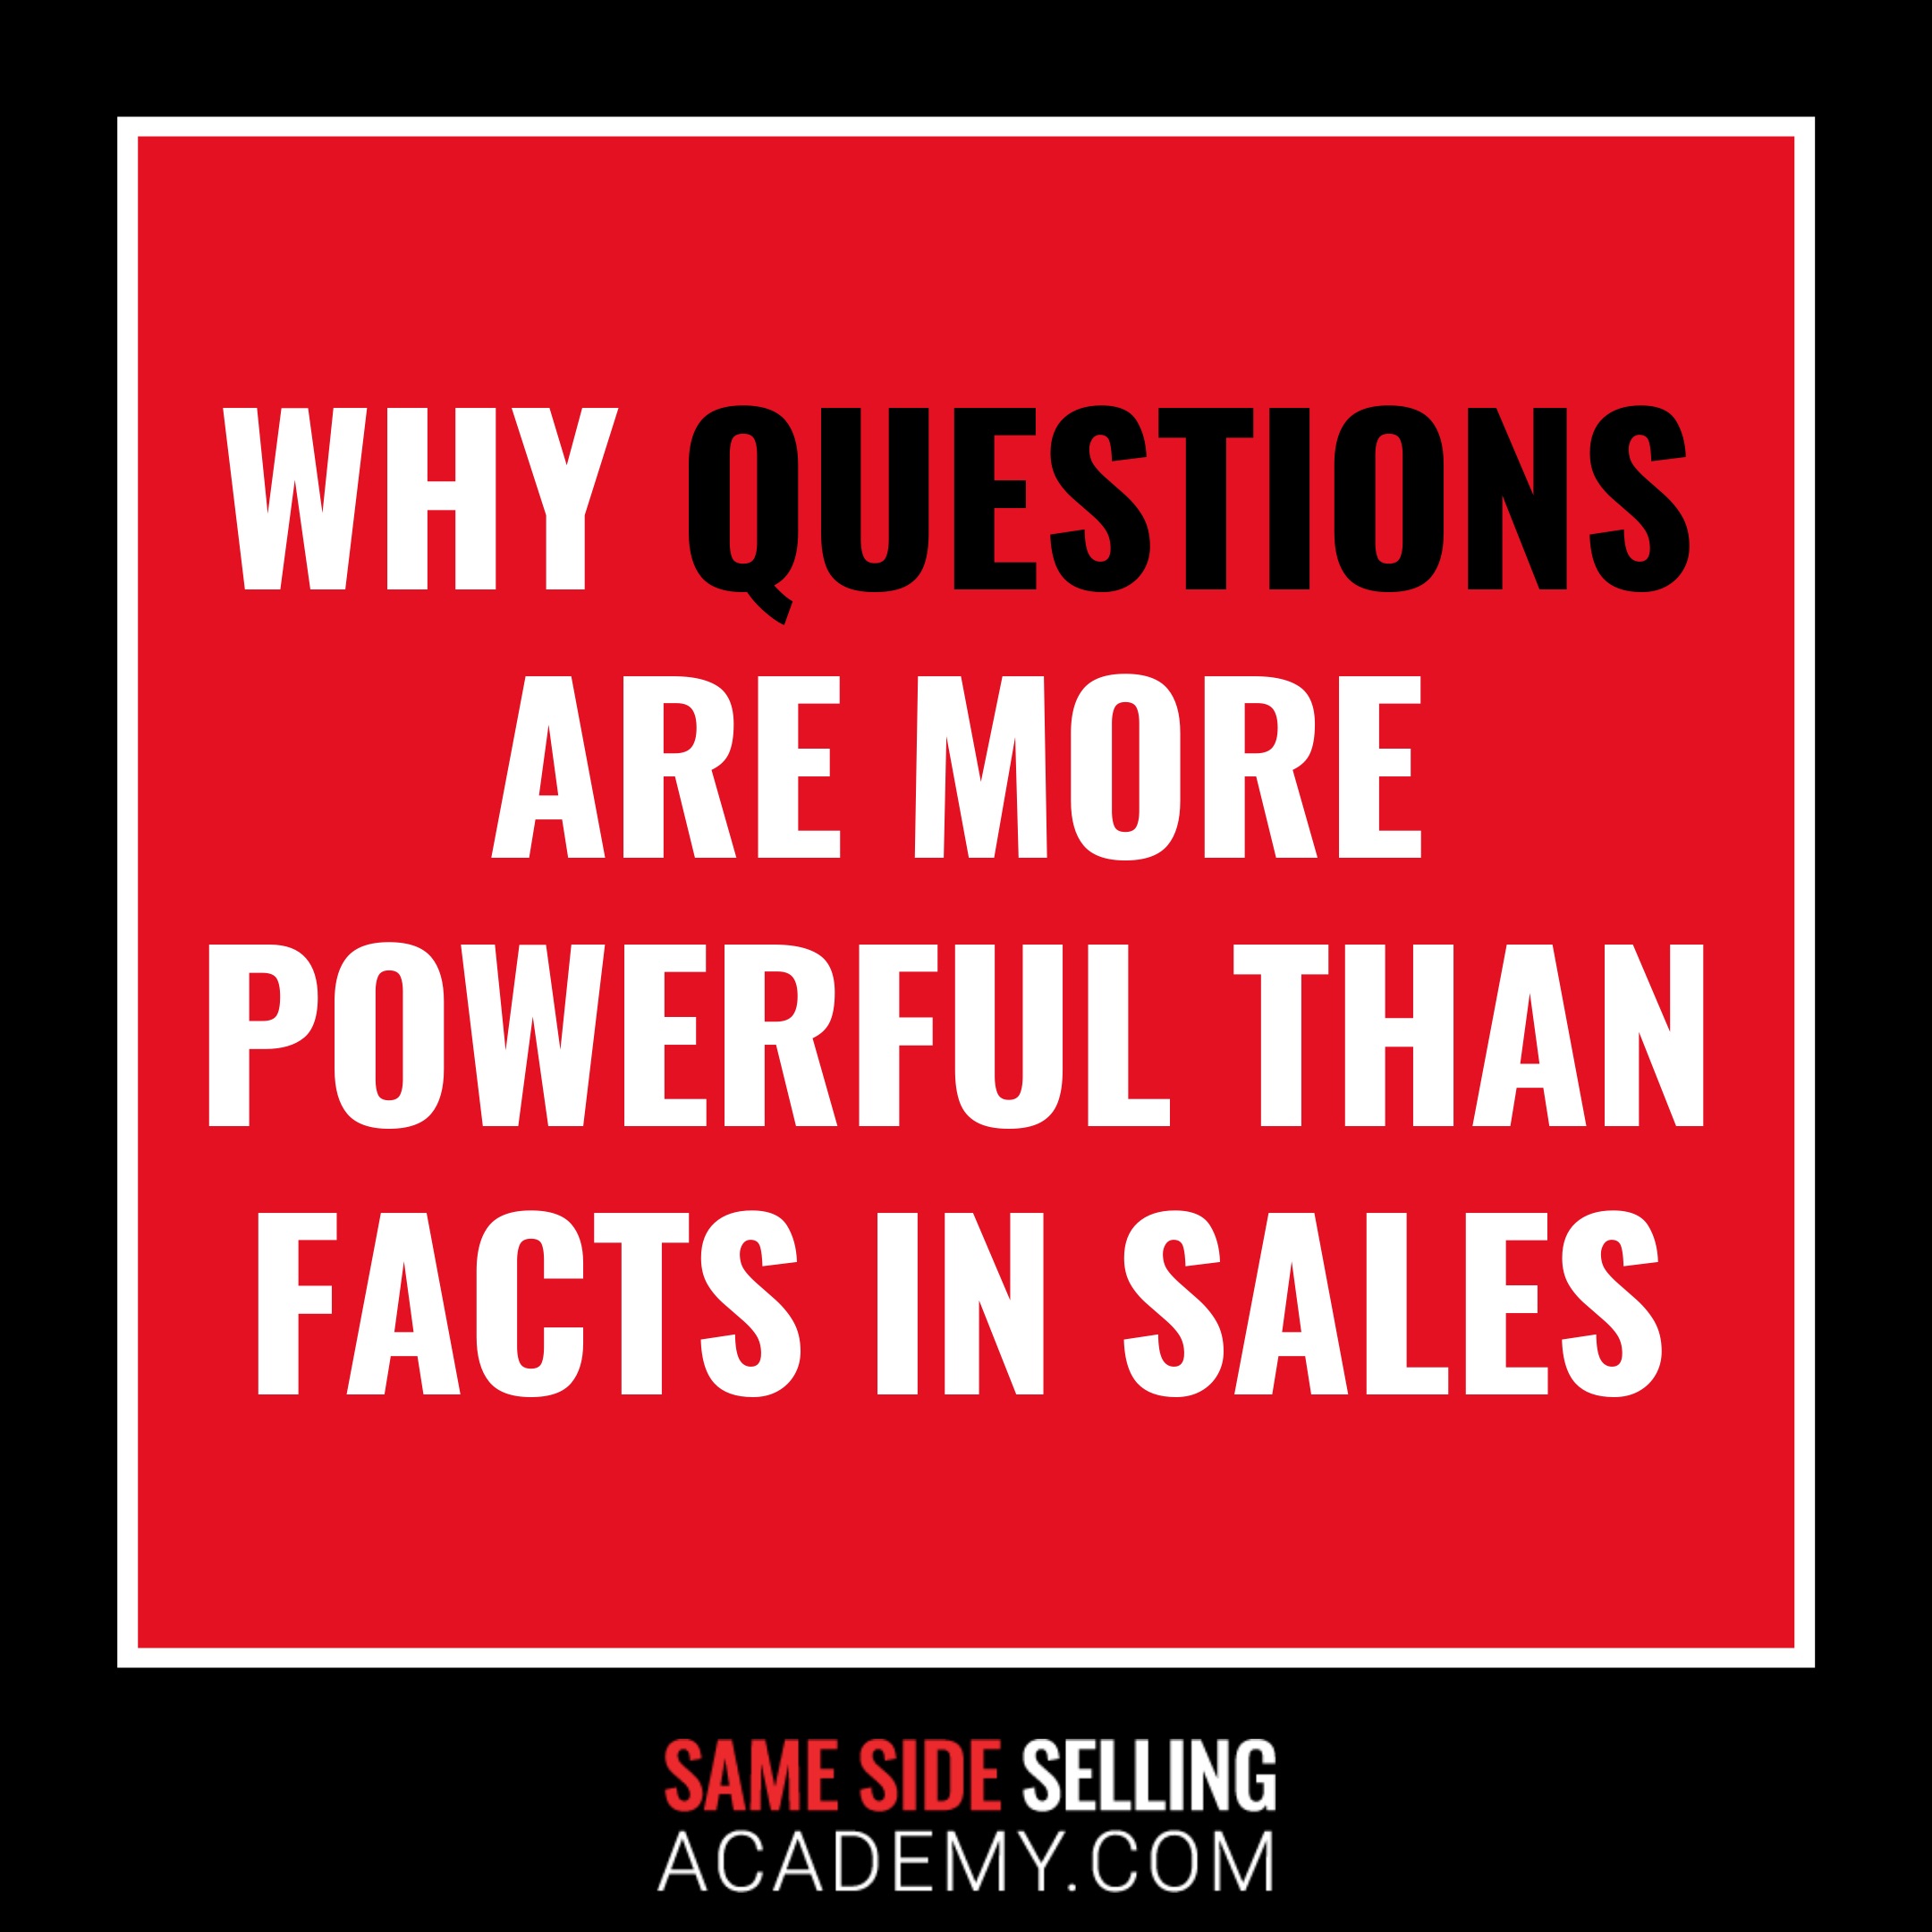 Why Questions Are More Powerful Than Facts in Sales